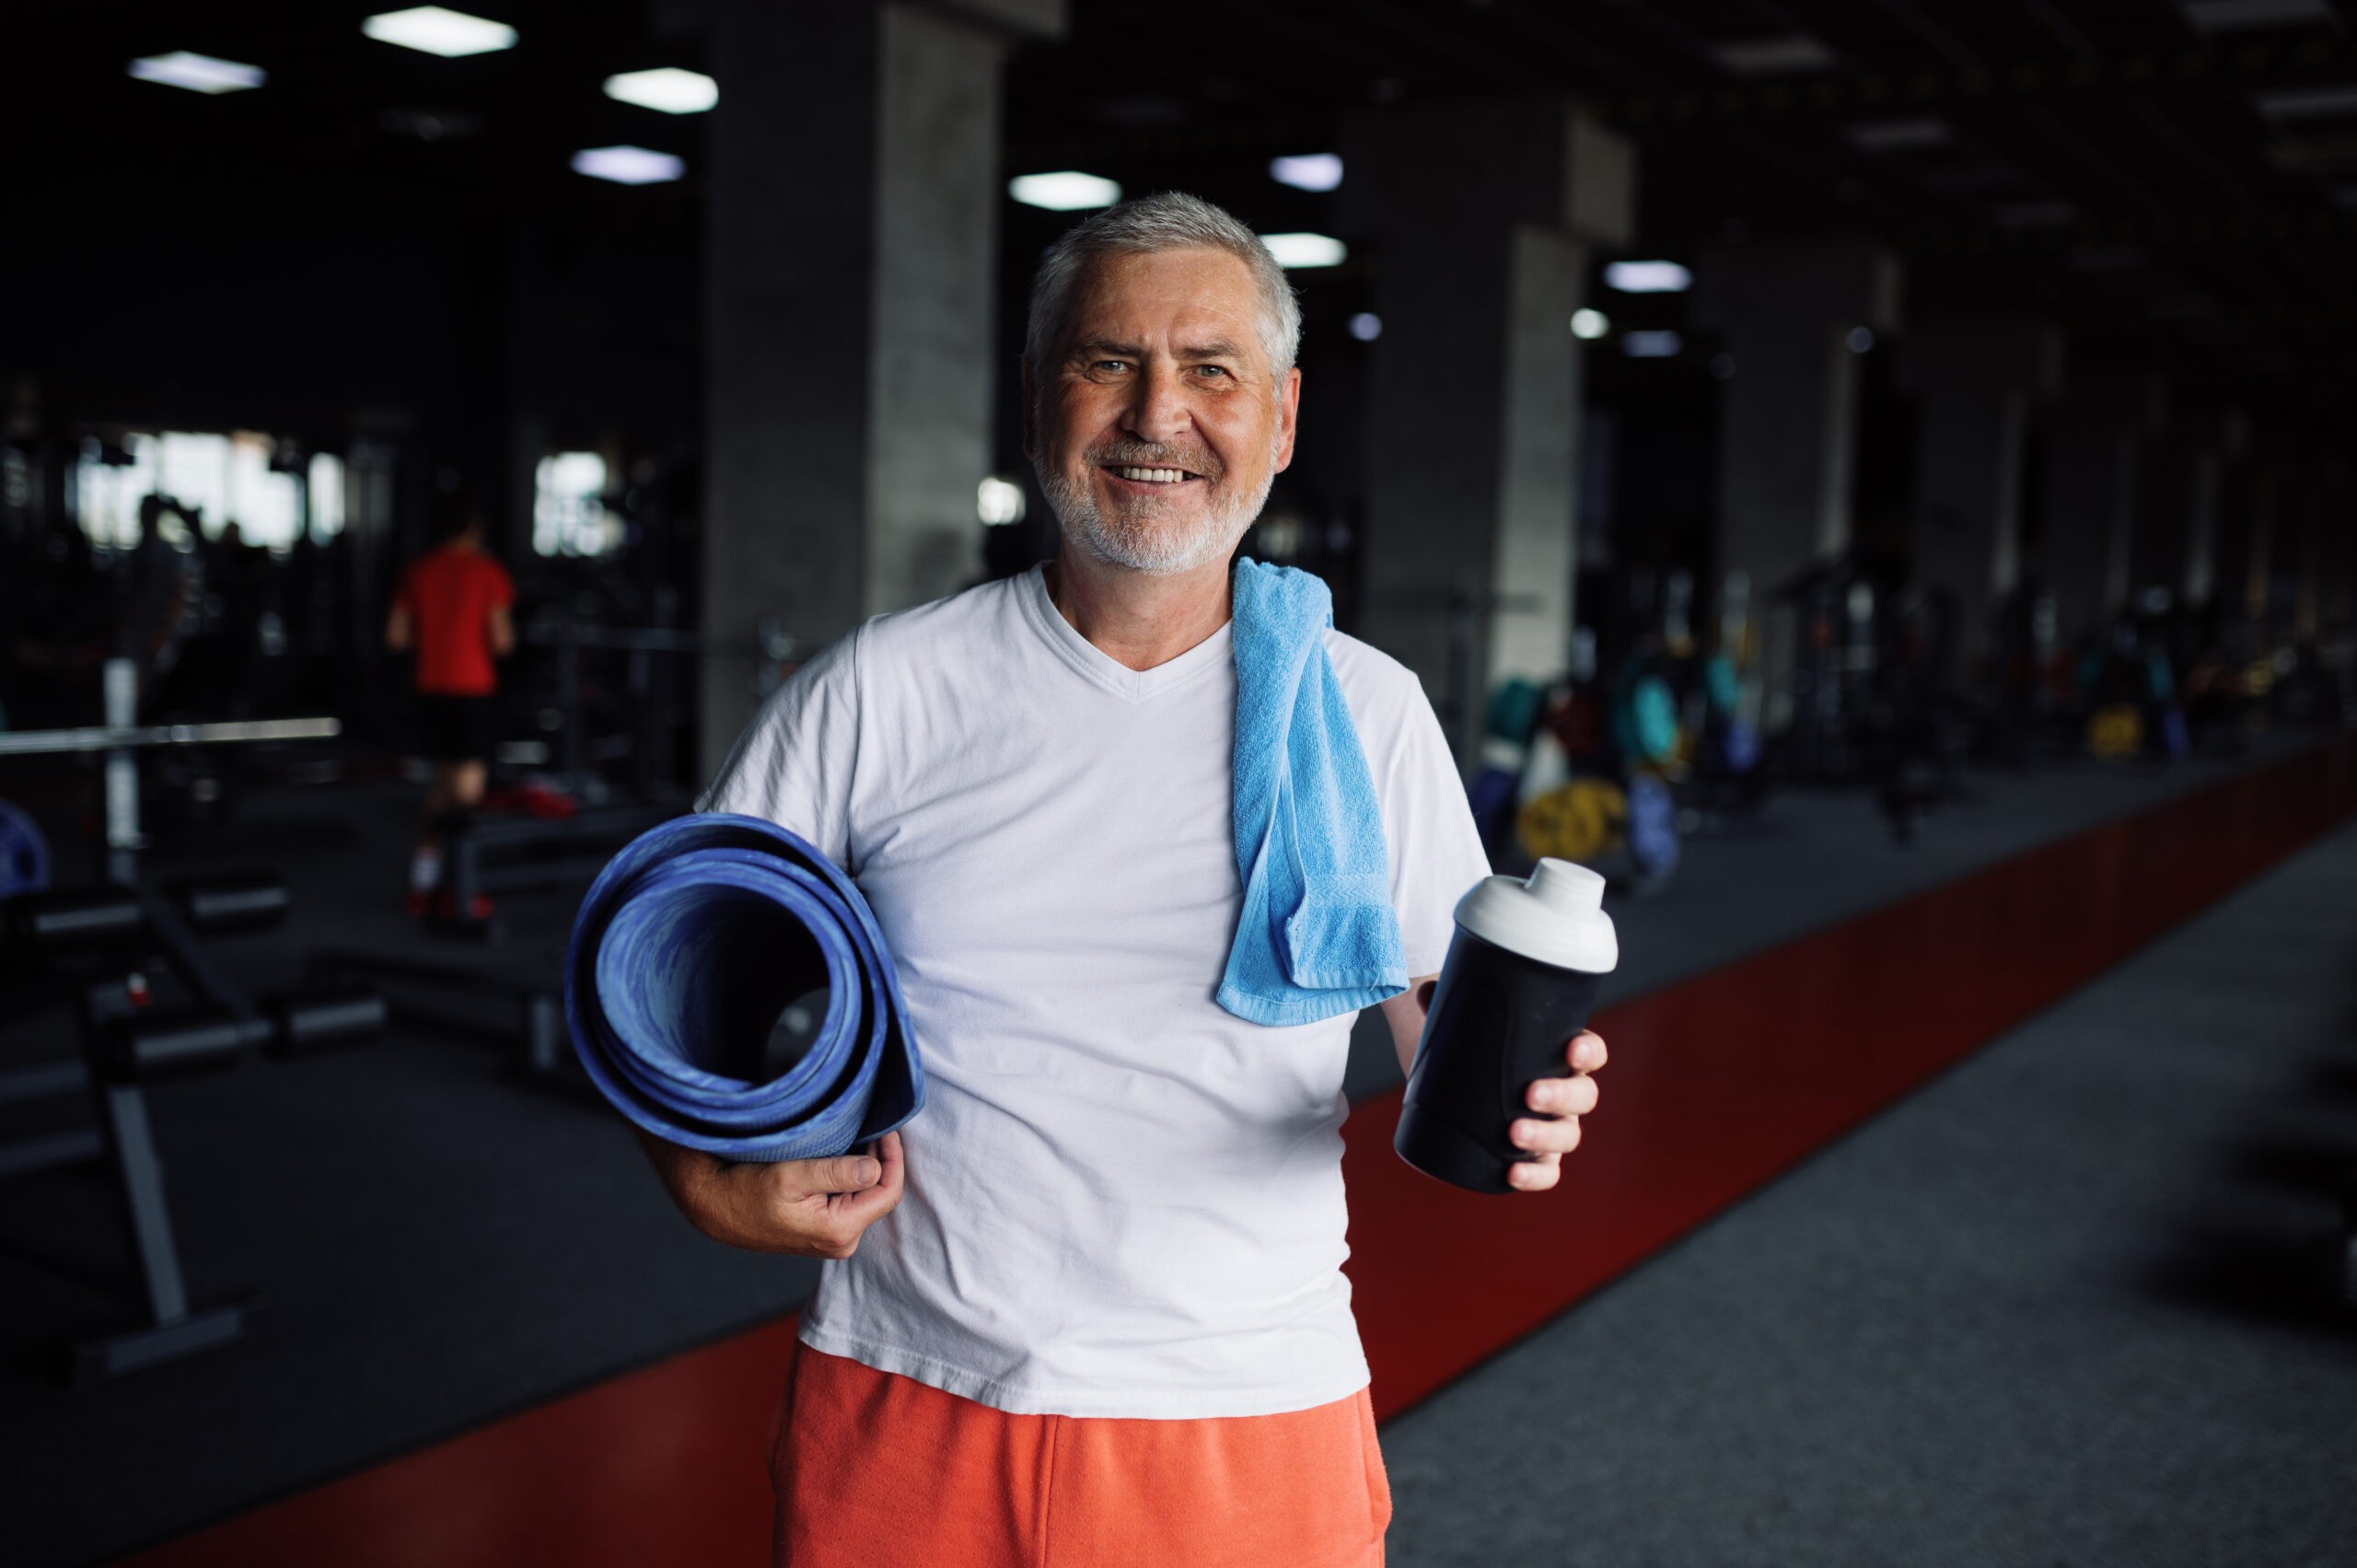 Old man with bottle of water, towel and mat in gym